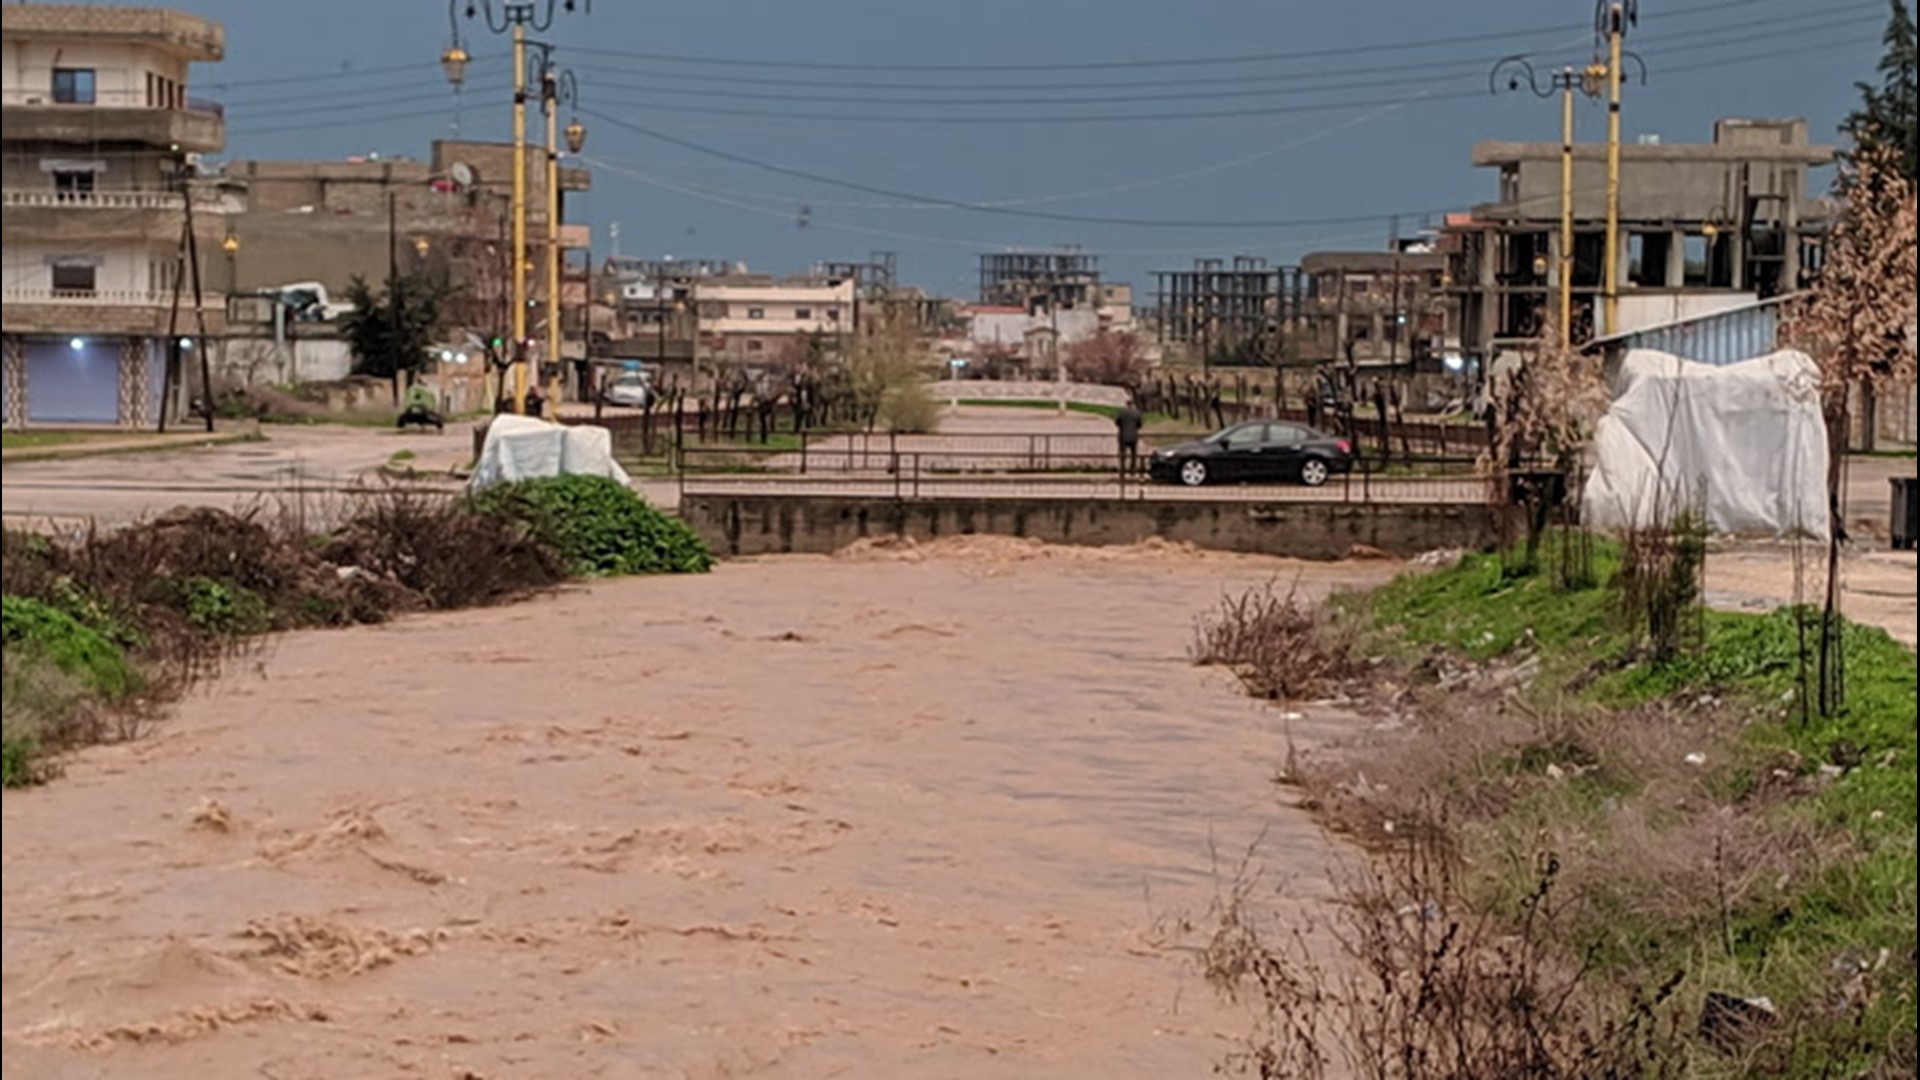 Derik, Syria, on April 3, was flooded due to heavy rainfall. These photos were shot by Felix Anton, you can find him on https://twitter.com/FelixDerik.